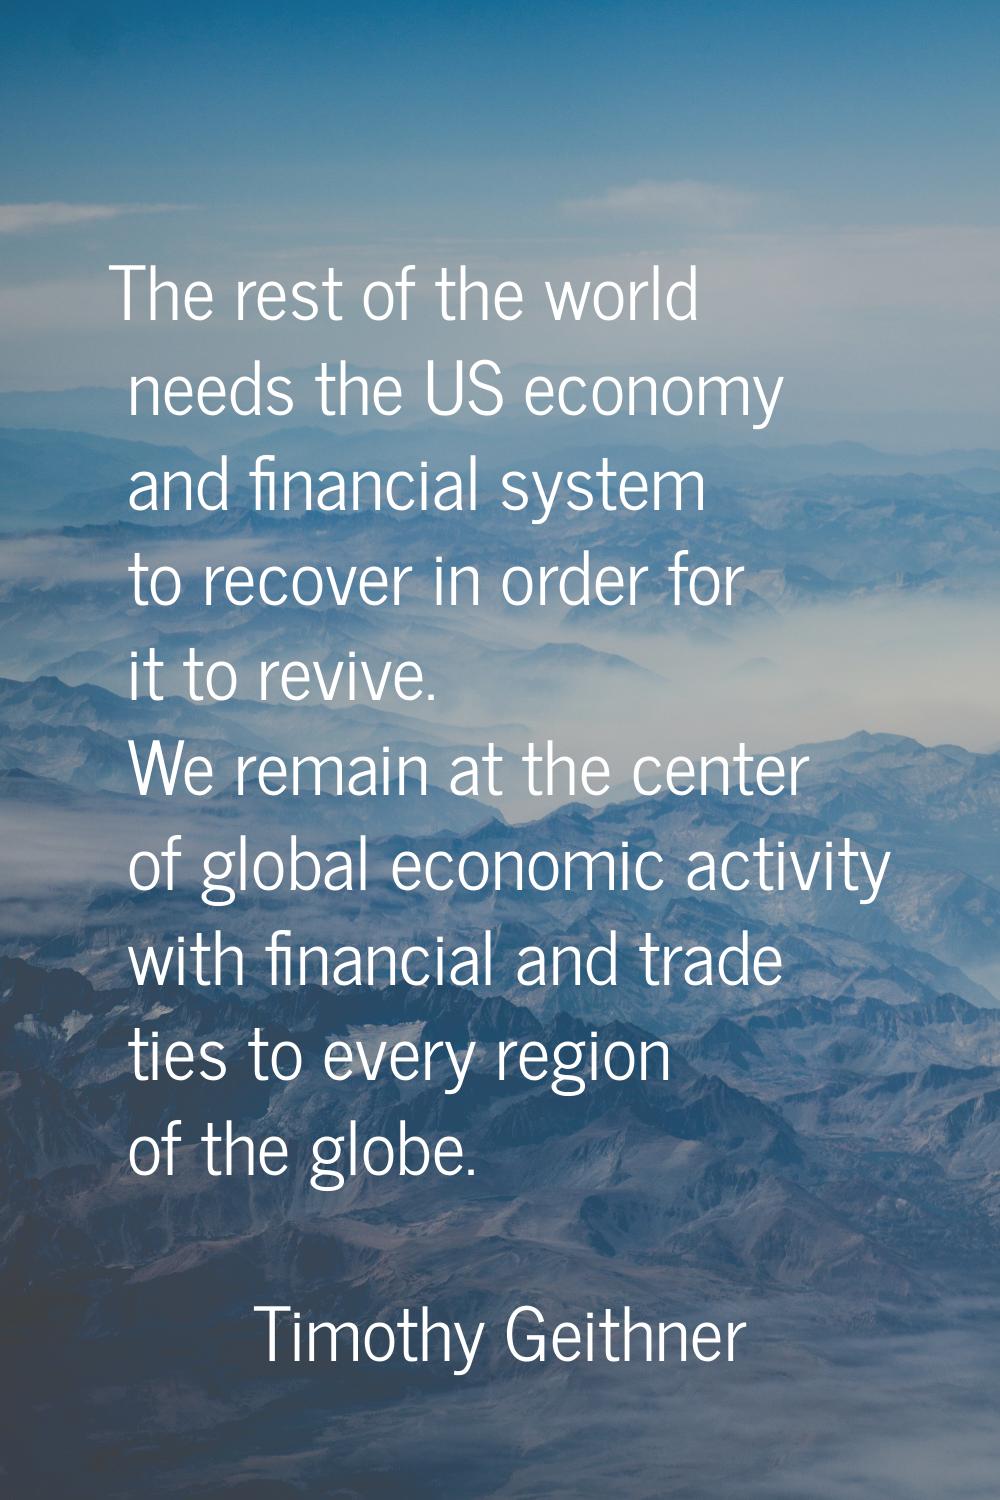 The rest of the world needs the US economy and financial system to recover in order for it to reviv